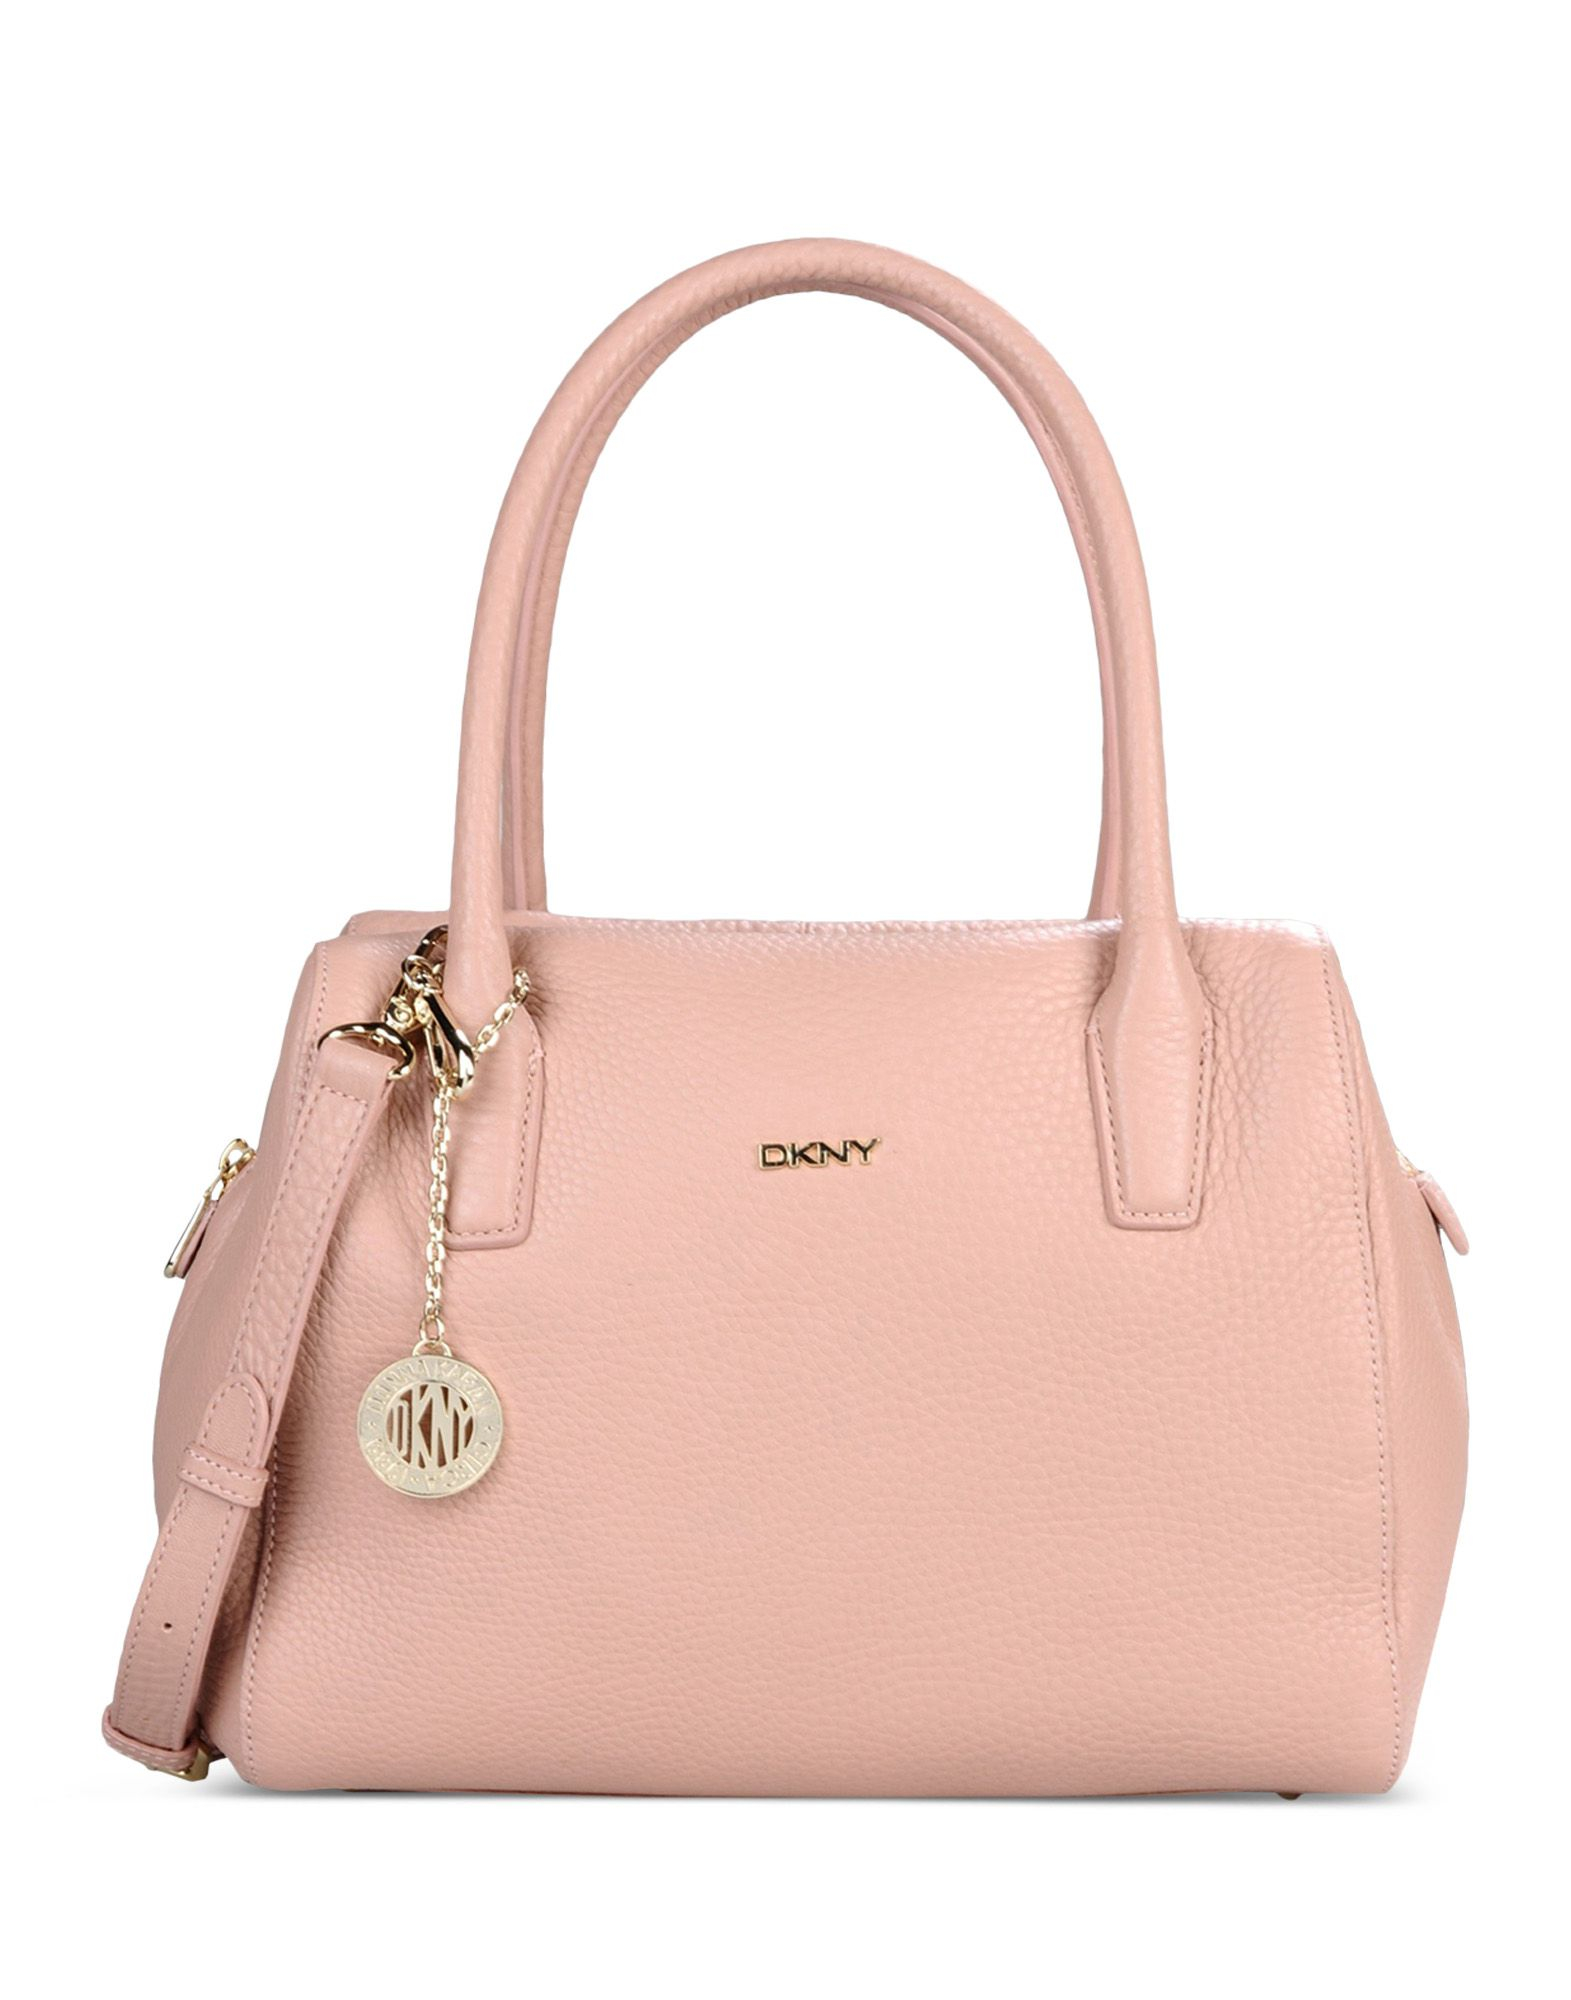 Dkny Large Leather Bag in Pink | Lyst